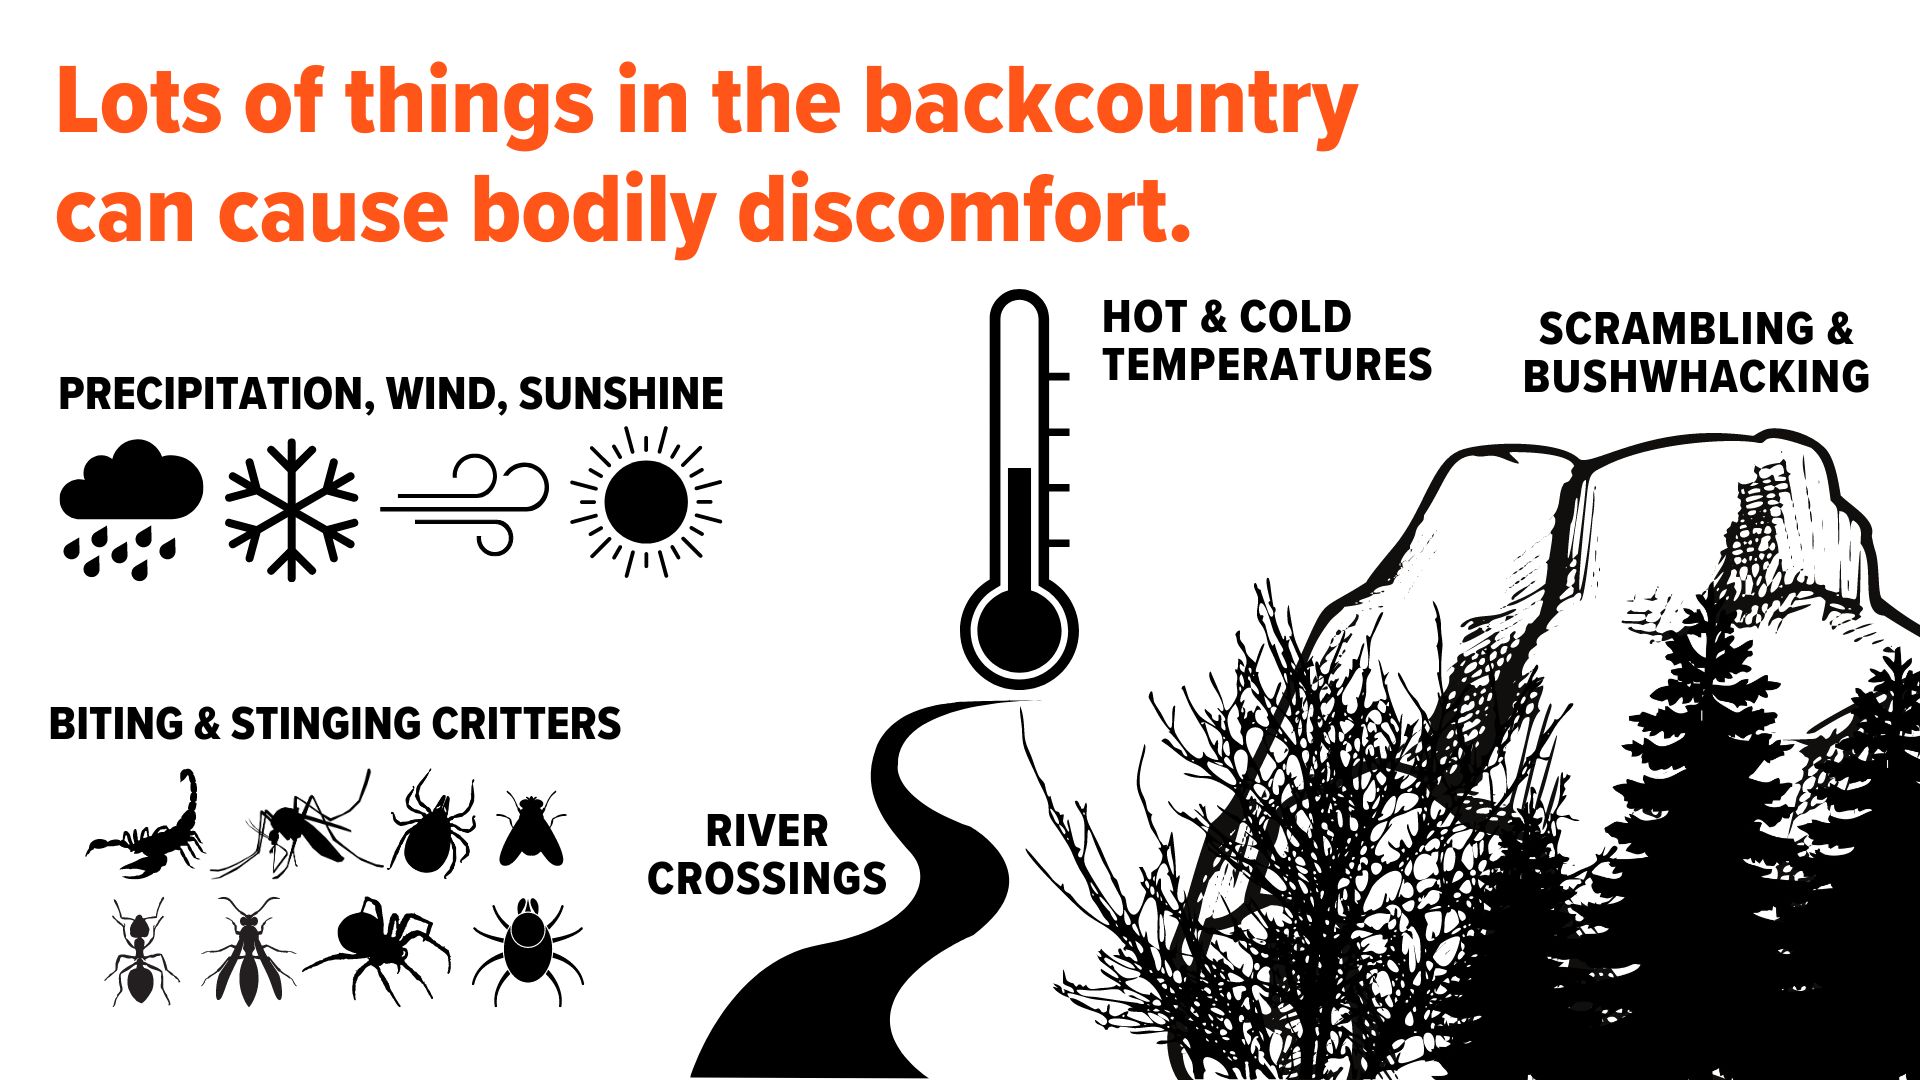 infographic showing factors that contribute to backcountry discomfort: precipitation, wind, sunshine, biting and stinging insects, hot and cold temperatures, scrambling, and bushwhacking